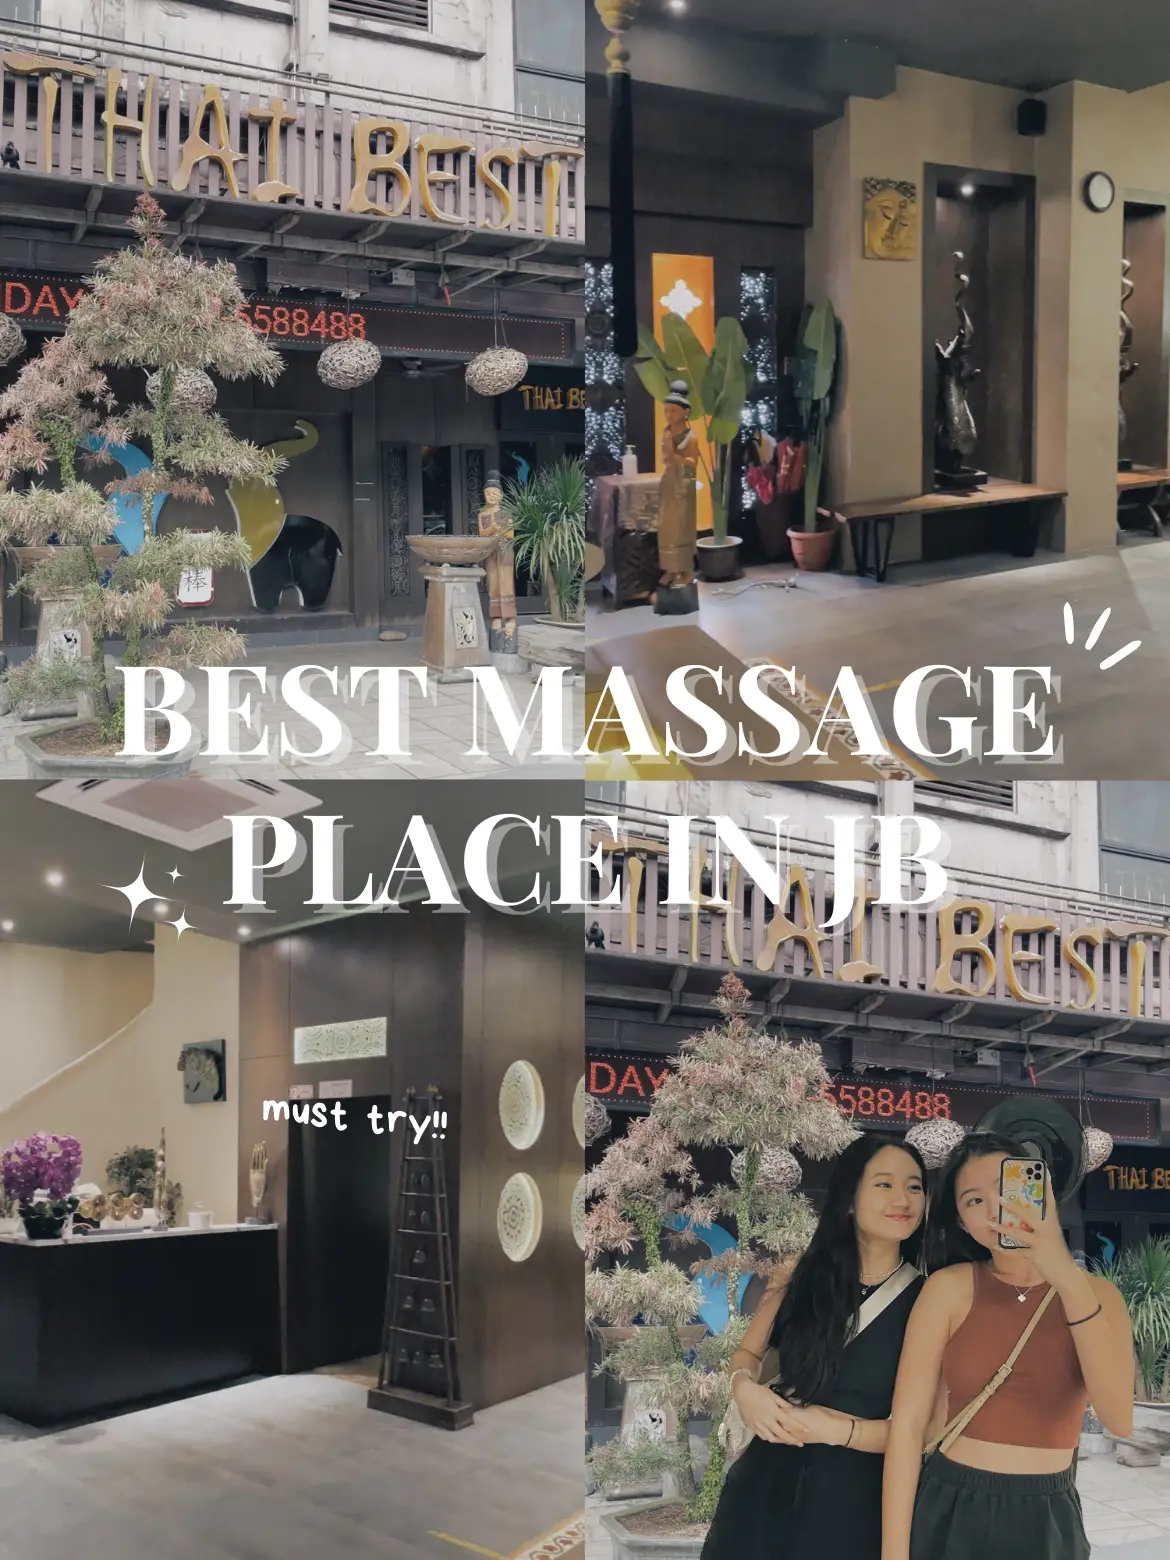 Must go massage place in JB!💆🏻‍♀️🇲🇾's images